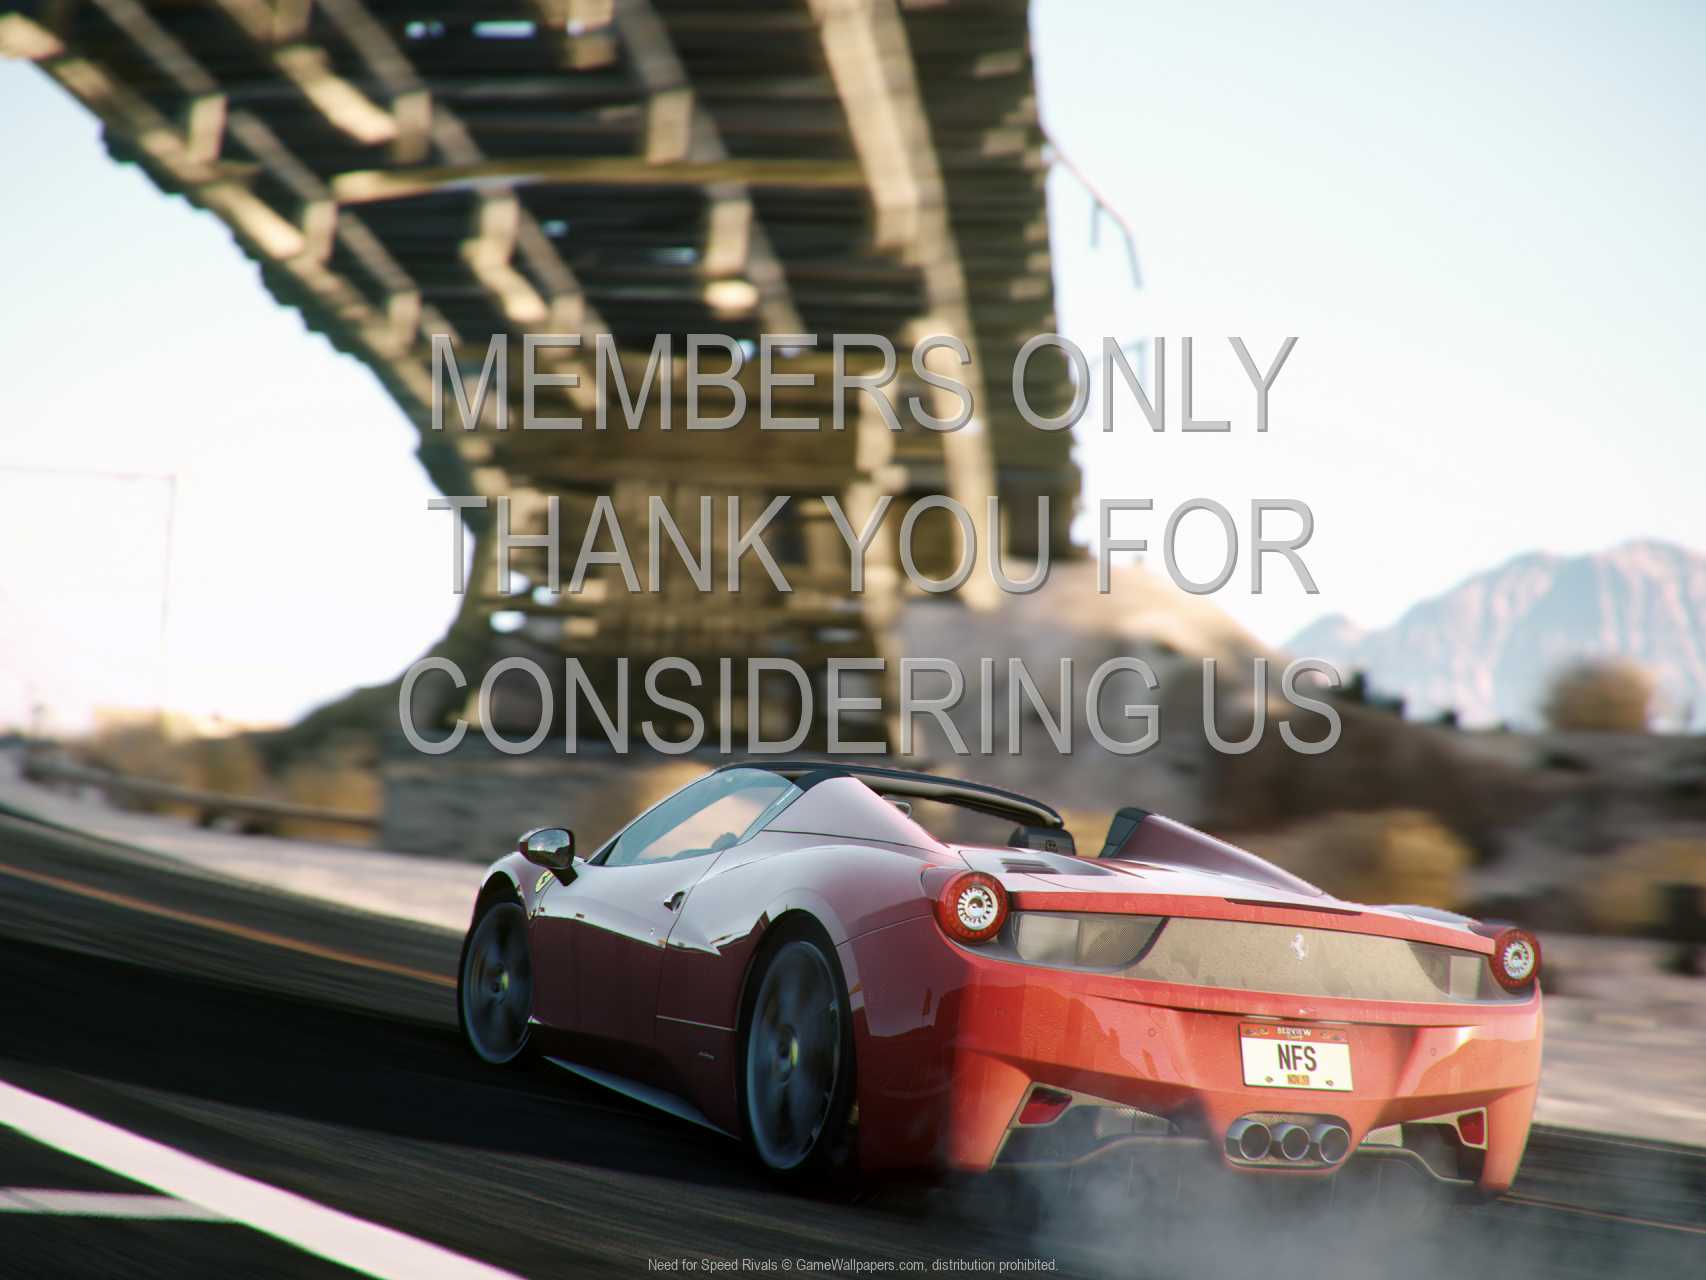 Need for Speed Rivals 720p Horizontal Mobile fond d'cran 06